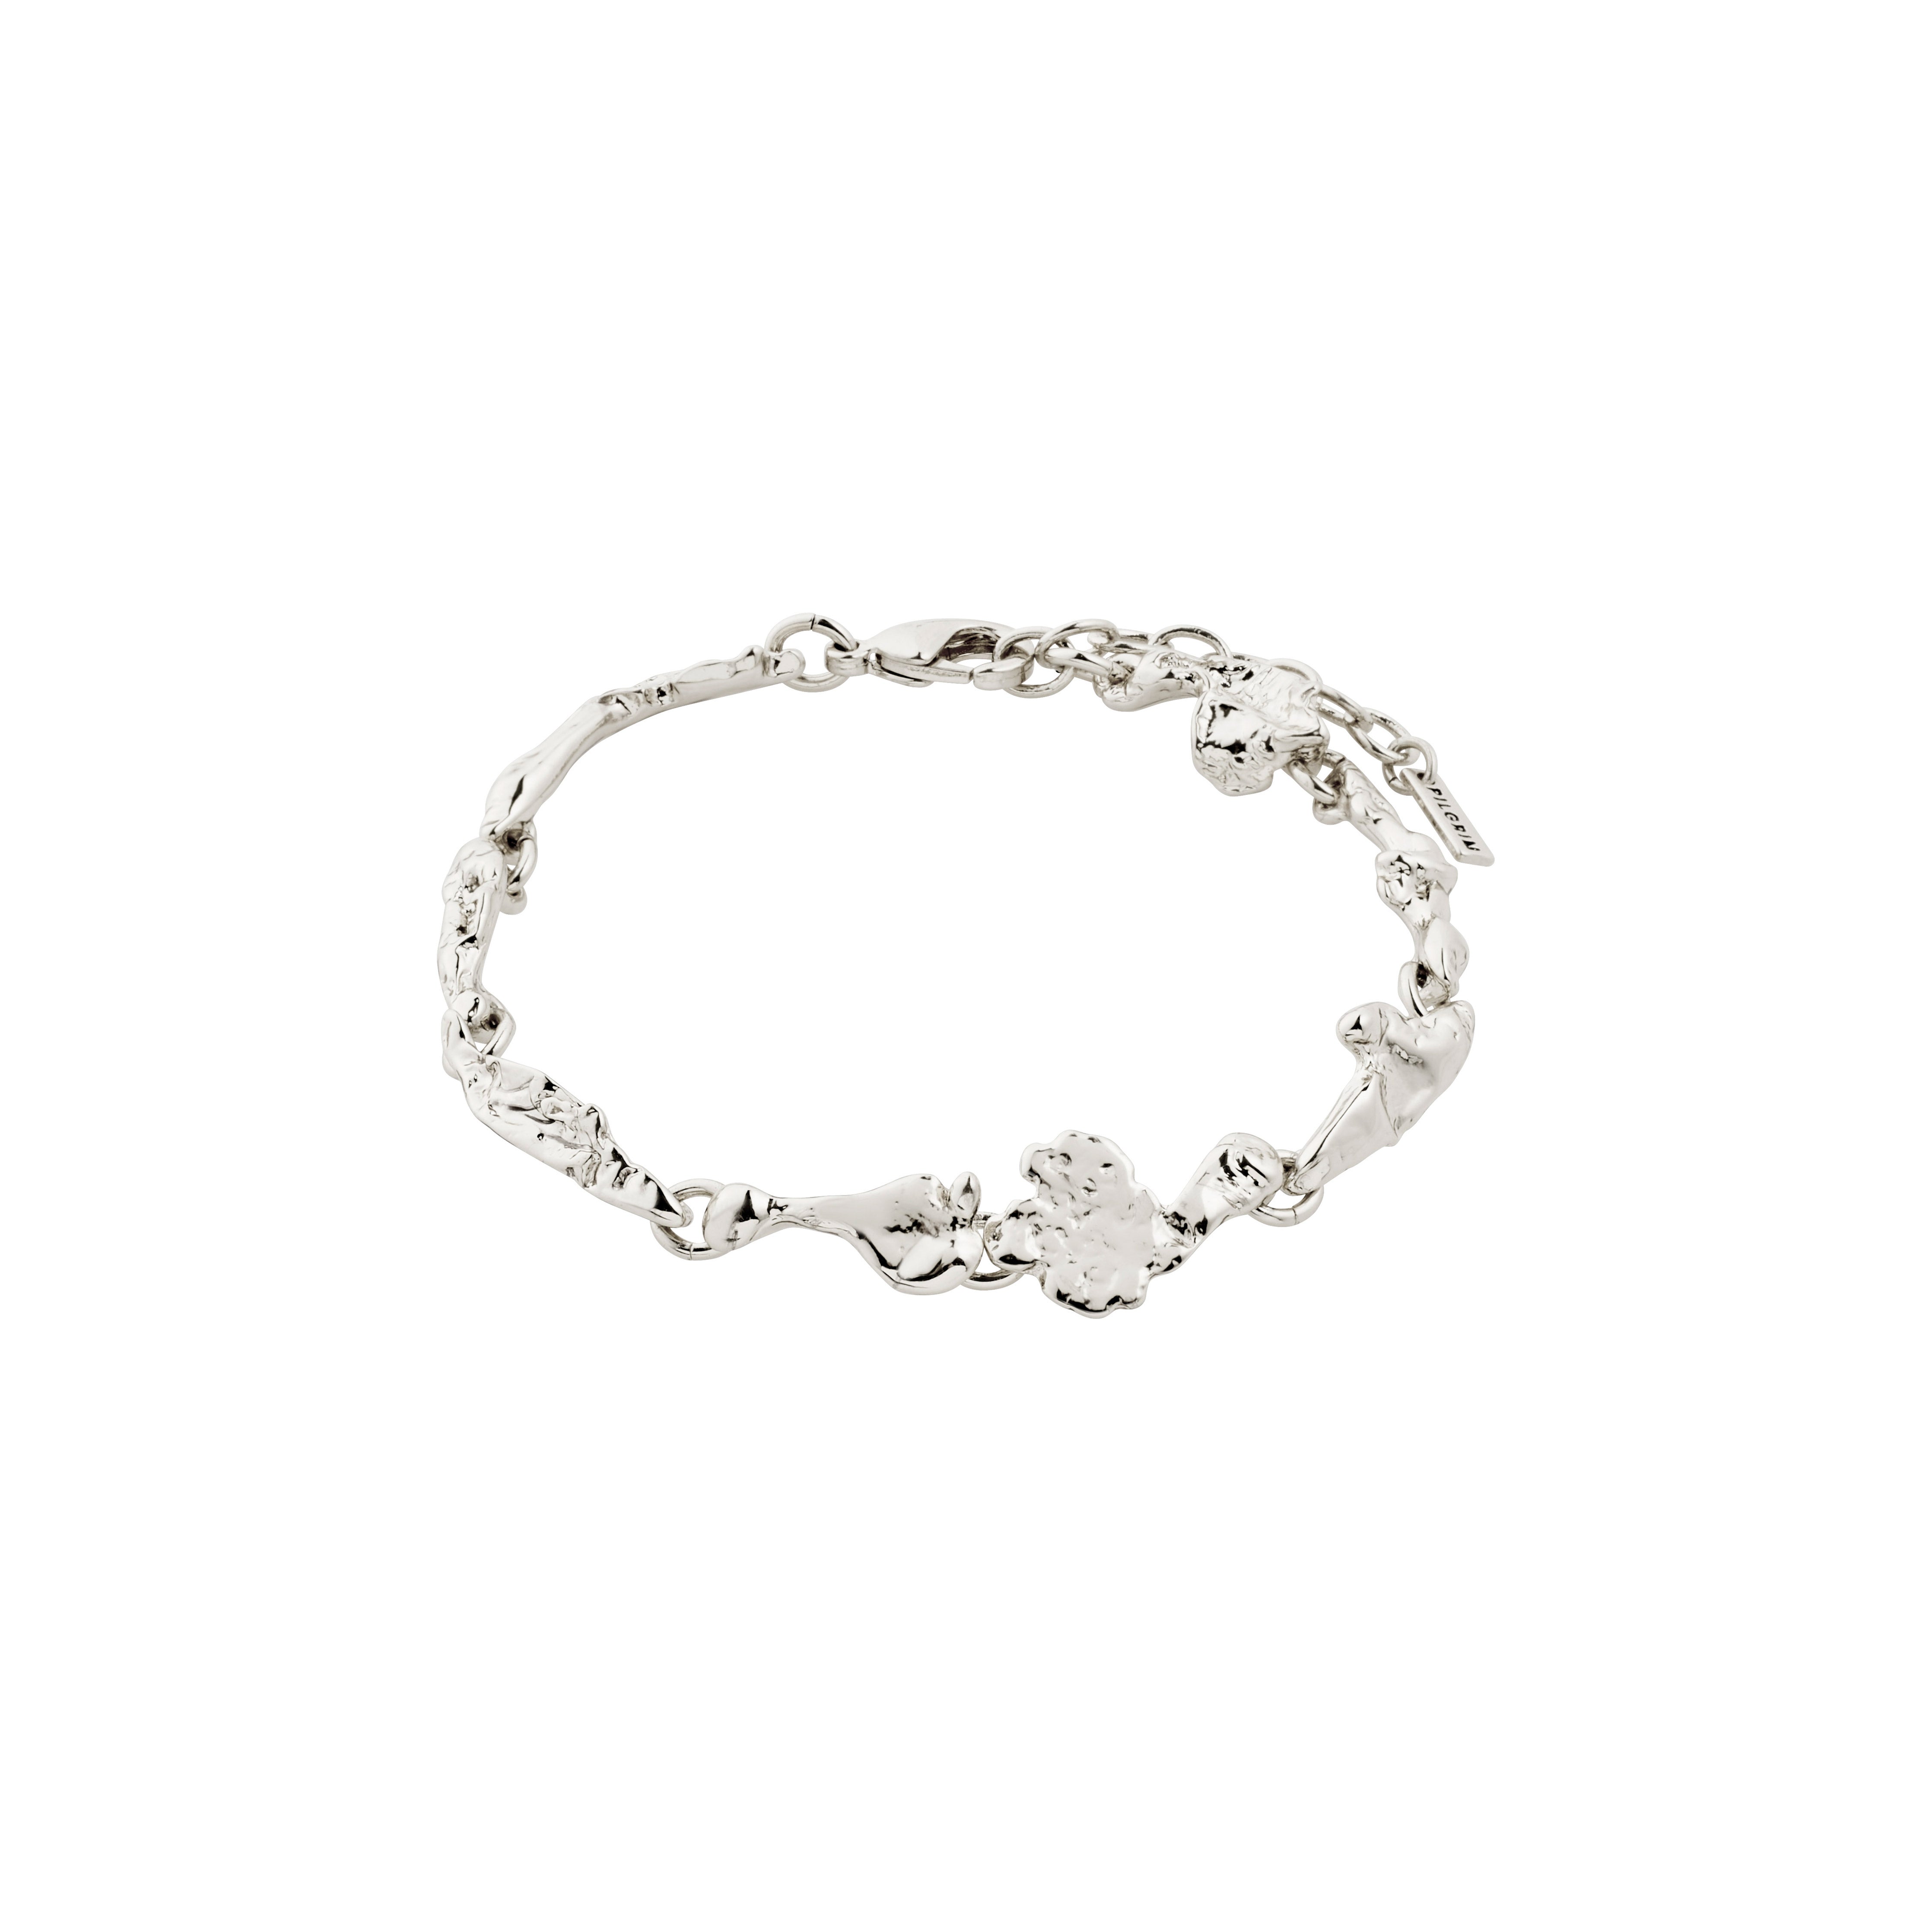 Solidarity Bracelet - Silver Plated